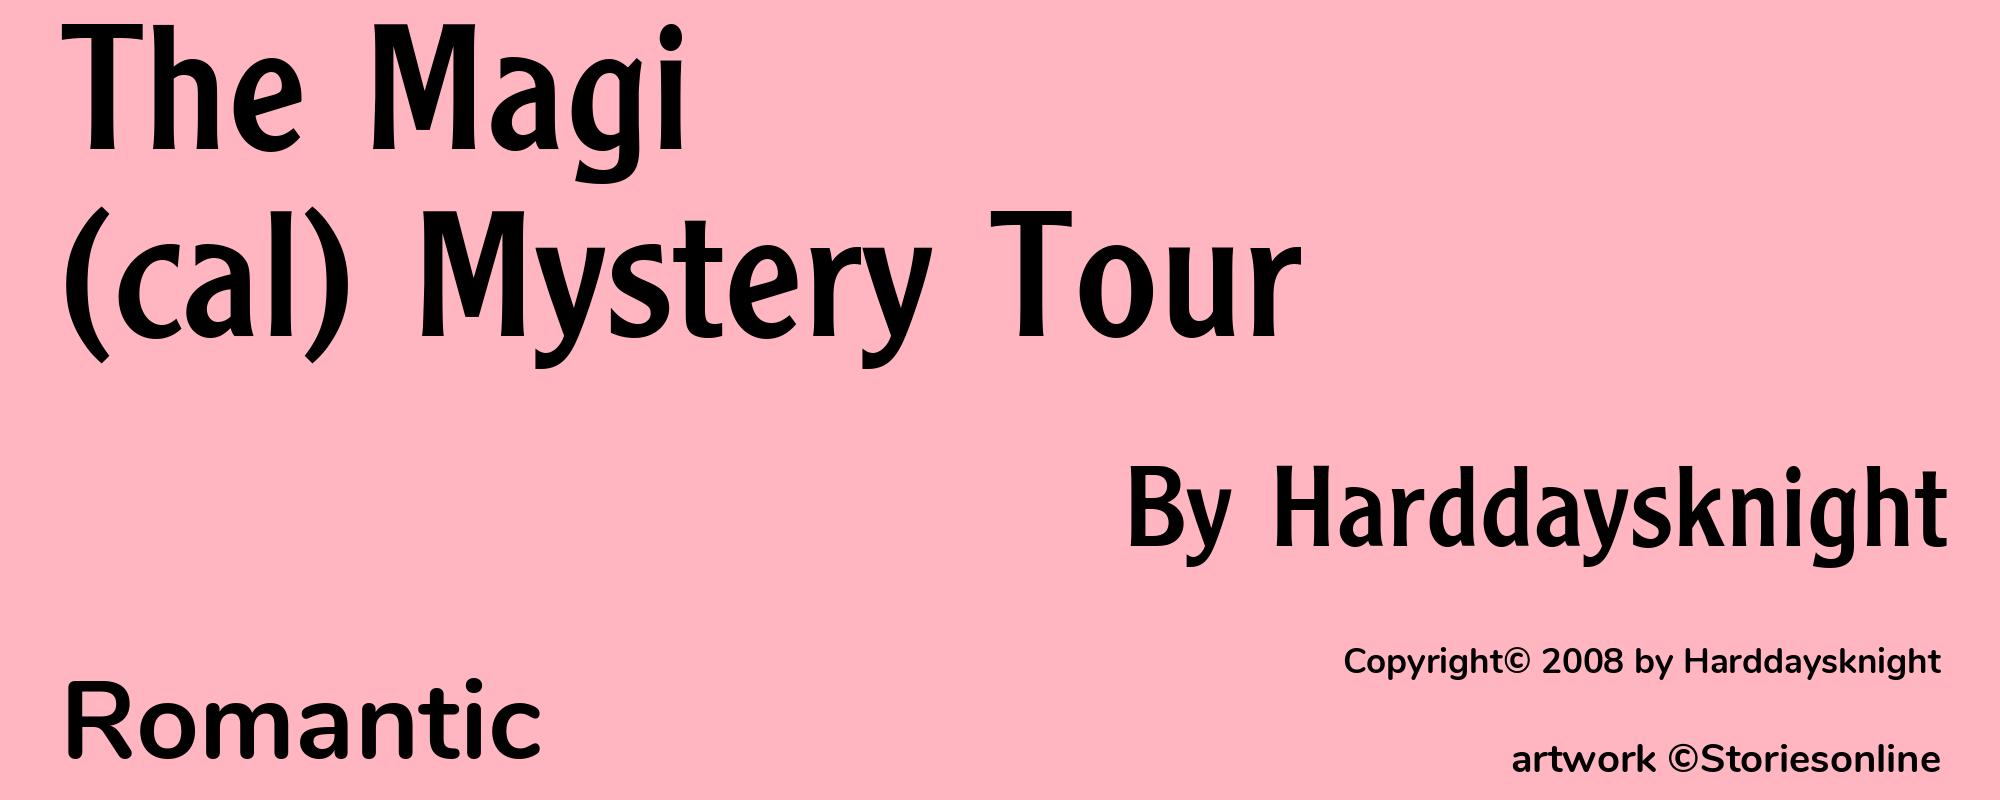 The Magi(cal) Mystery Tour - Cover